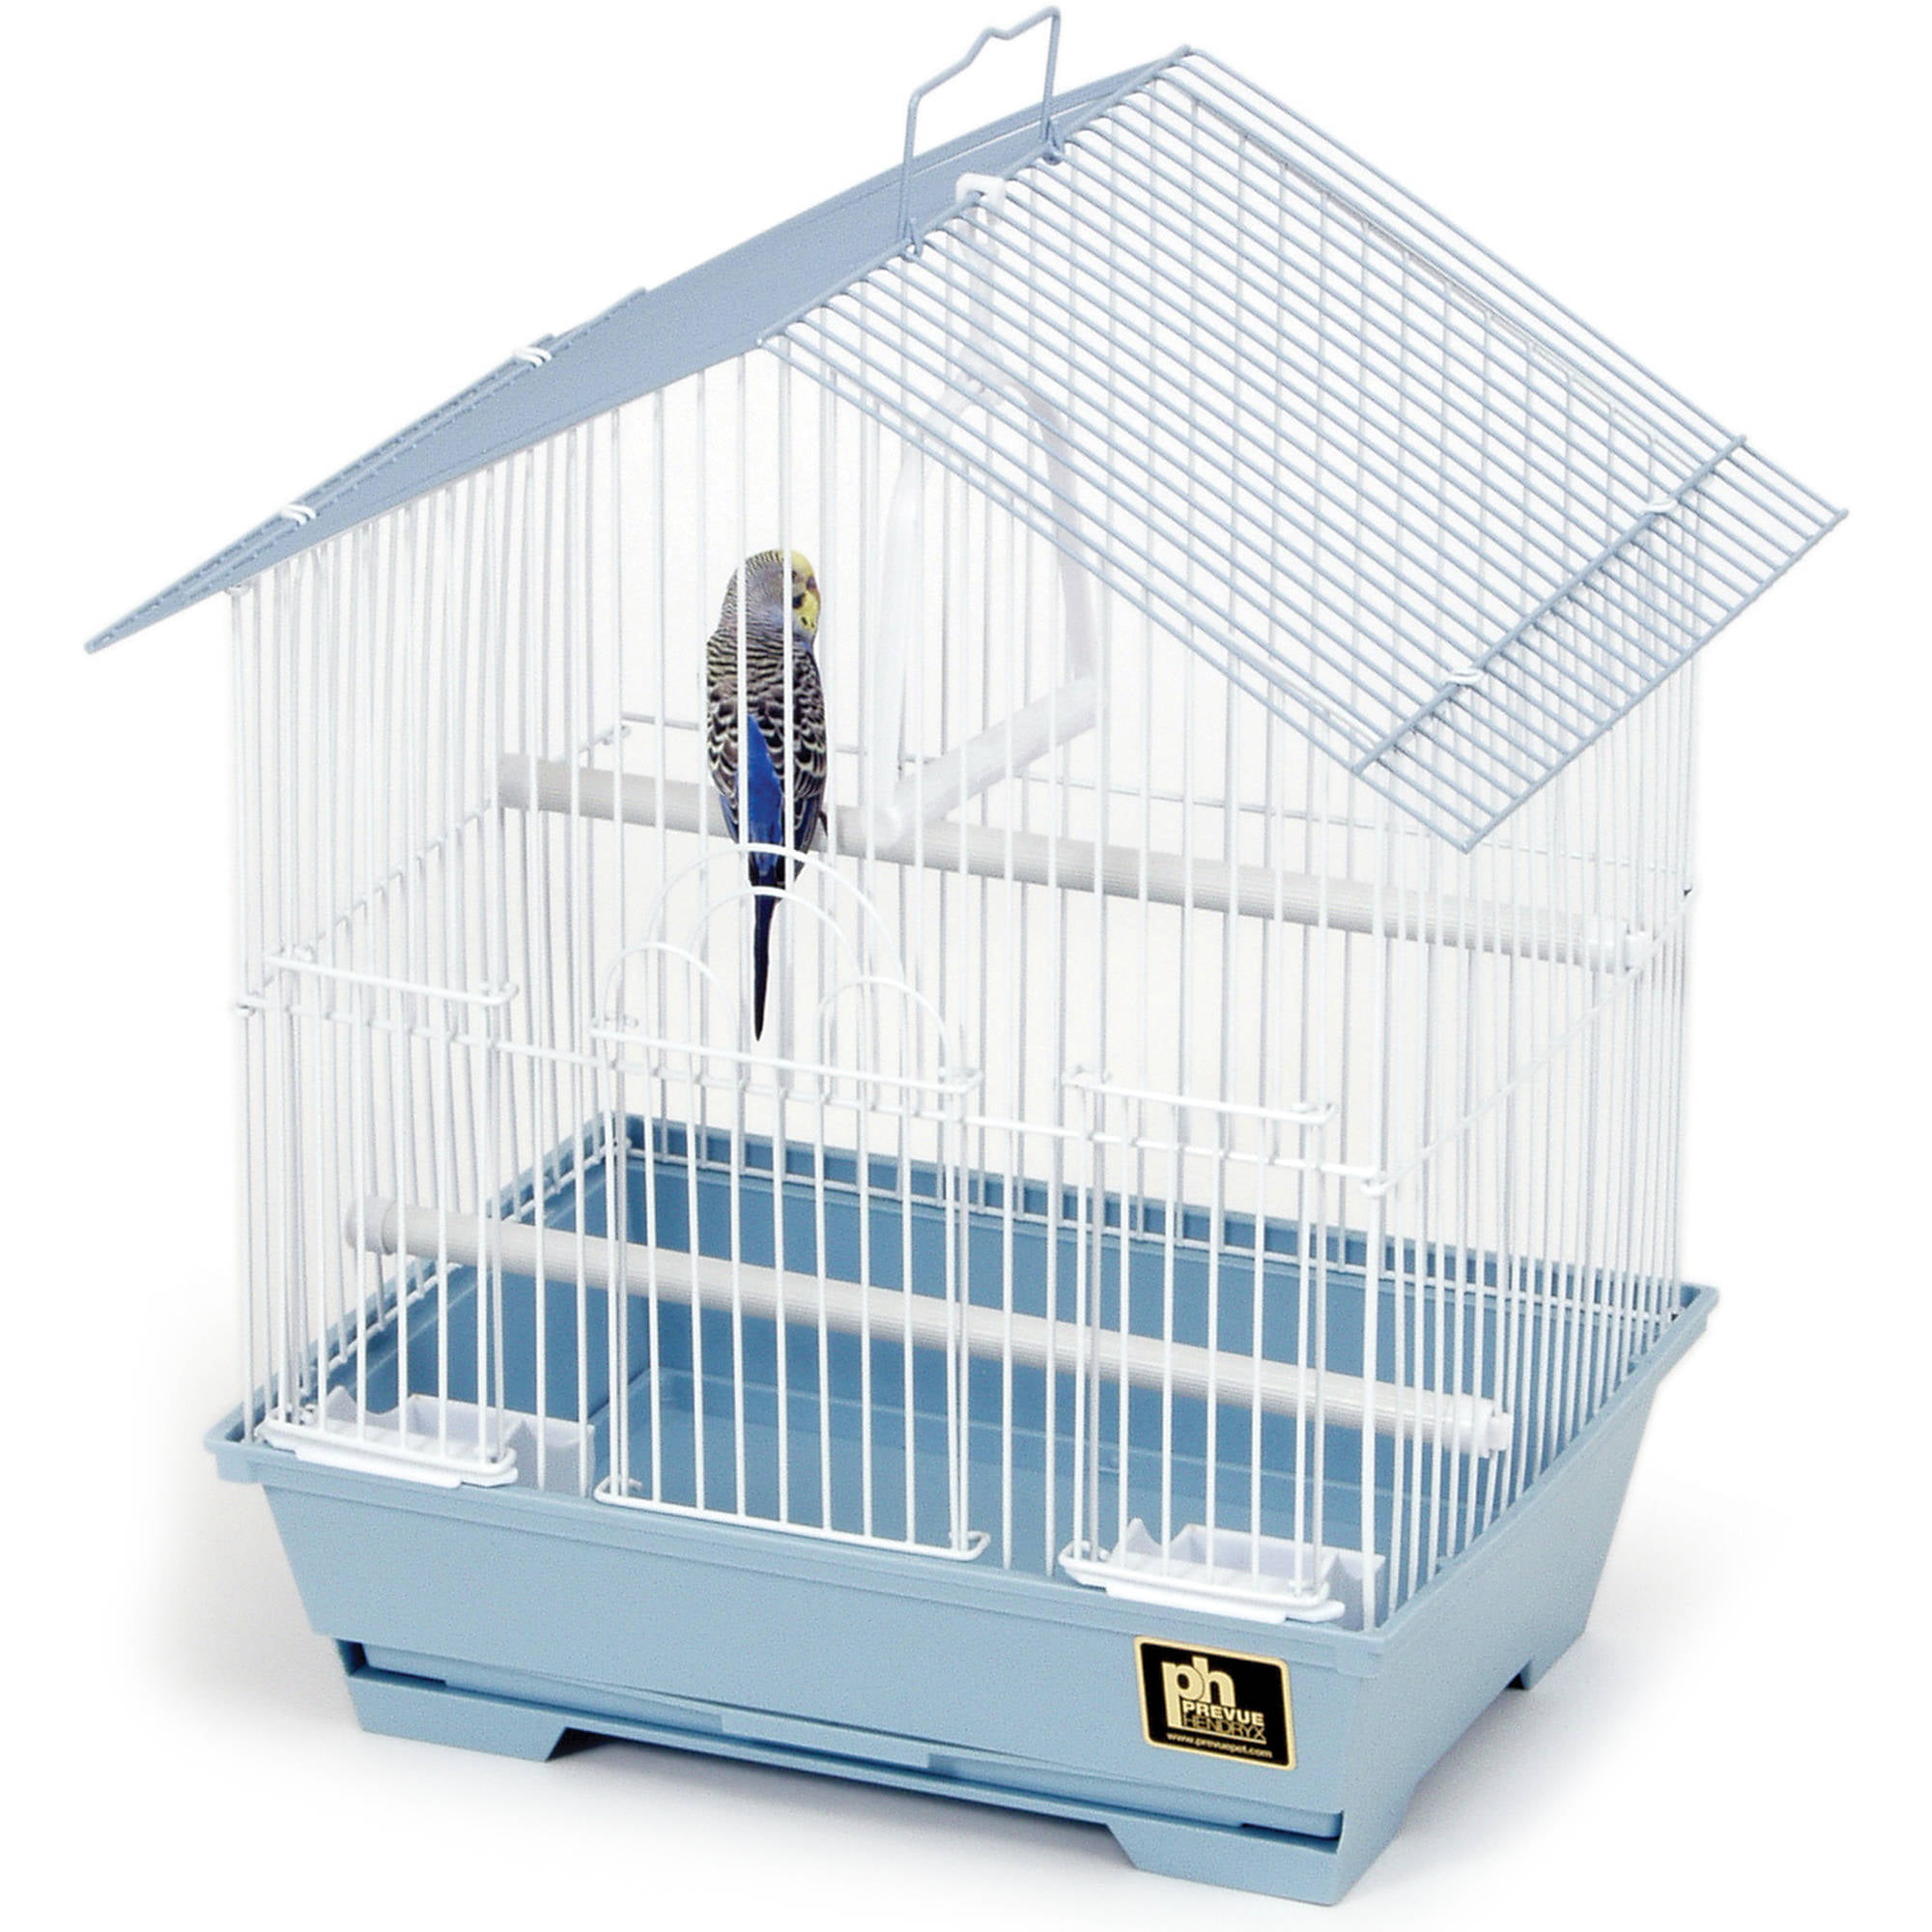 Red ReMile Super Value Bird Cage Budgerigar Small Carrot Cage Light Portable House Style Economic Configuration